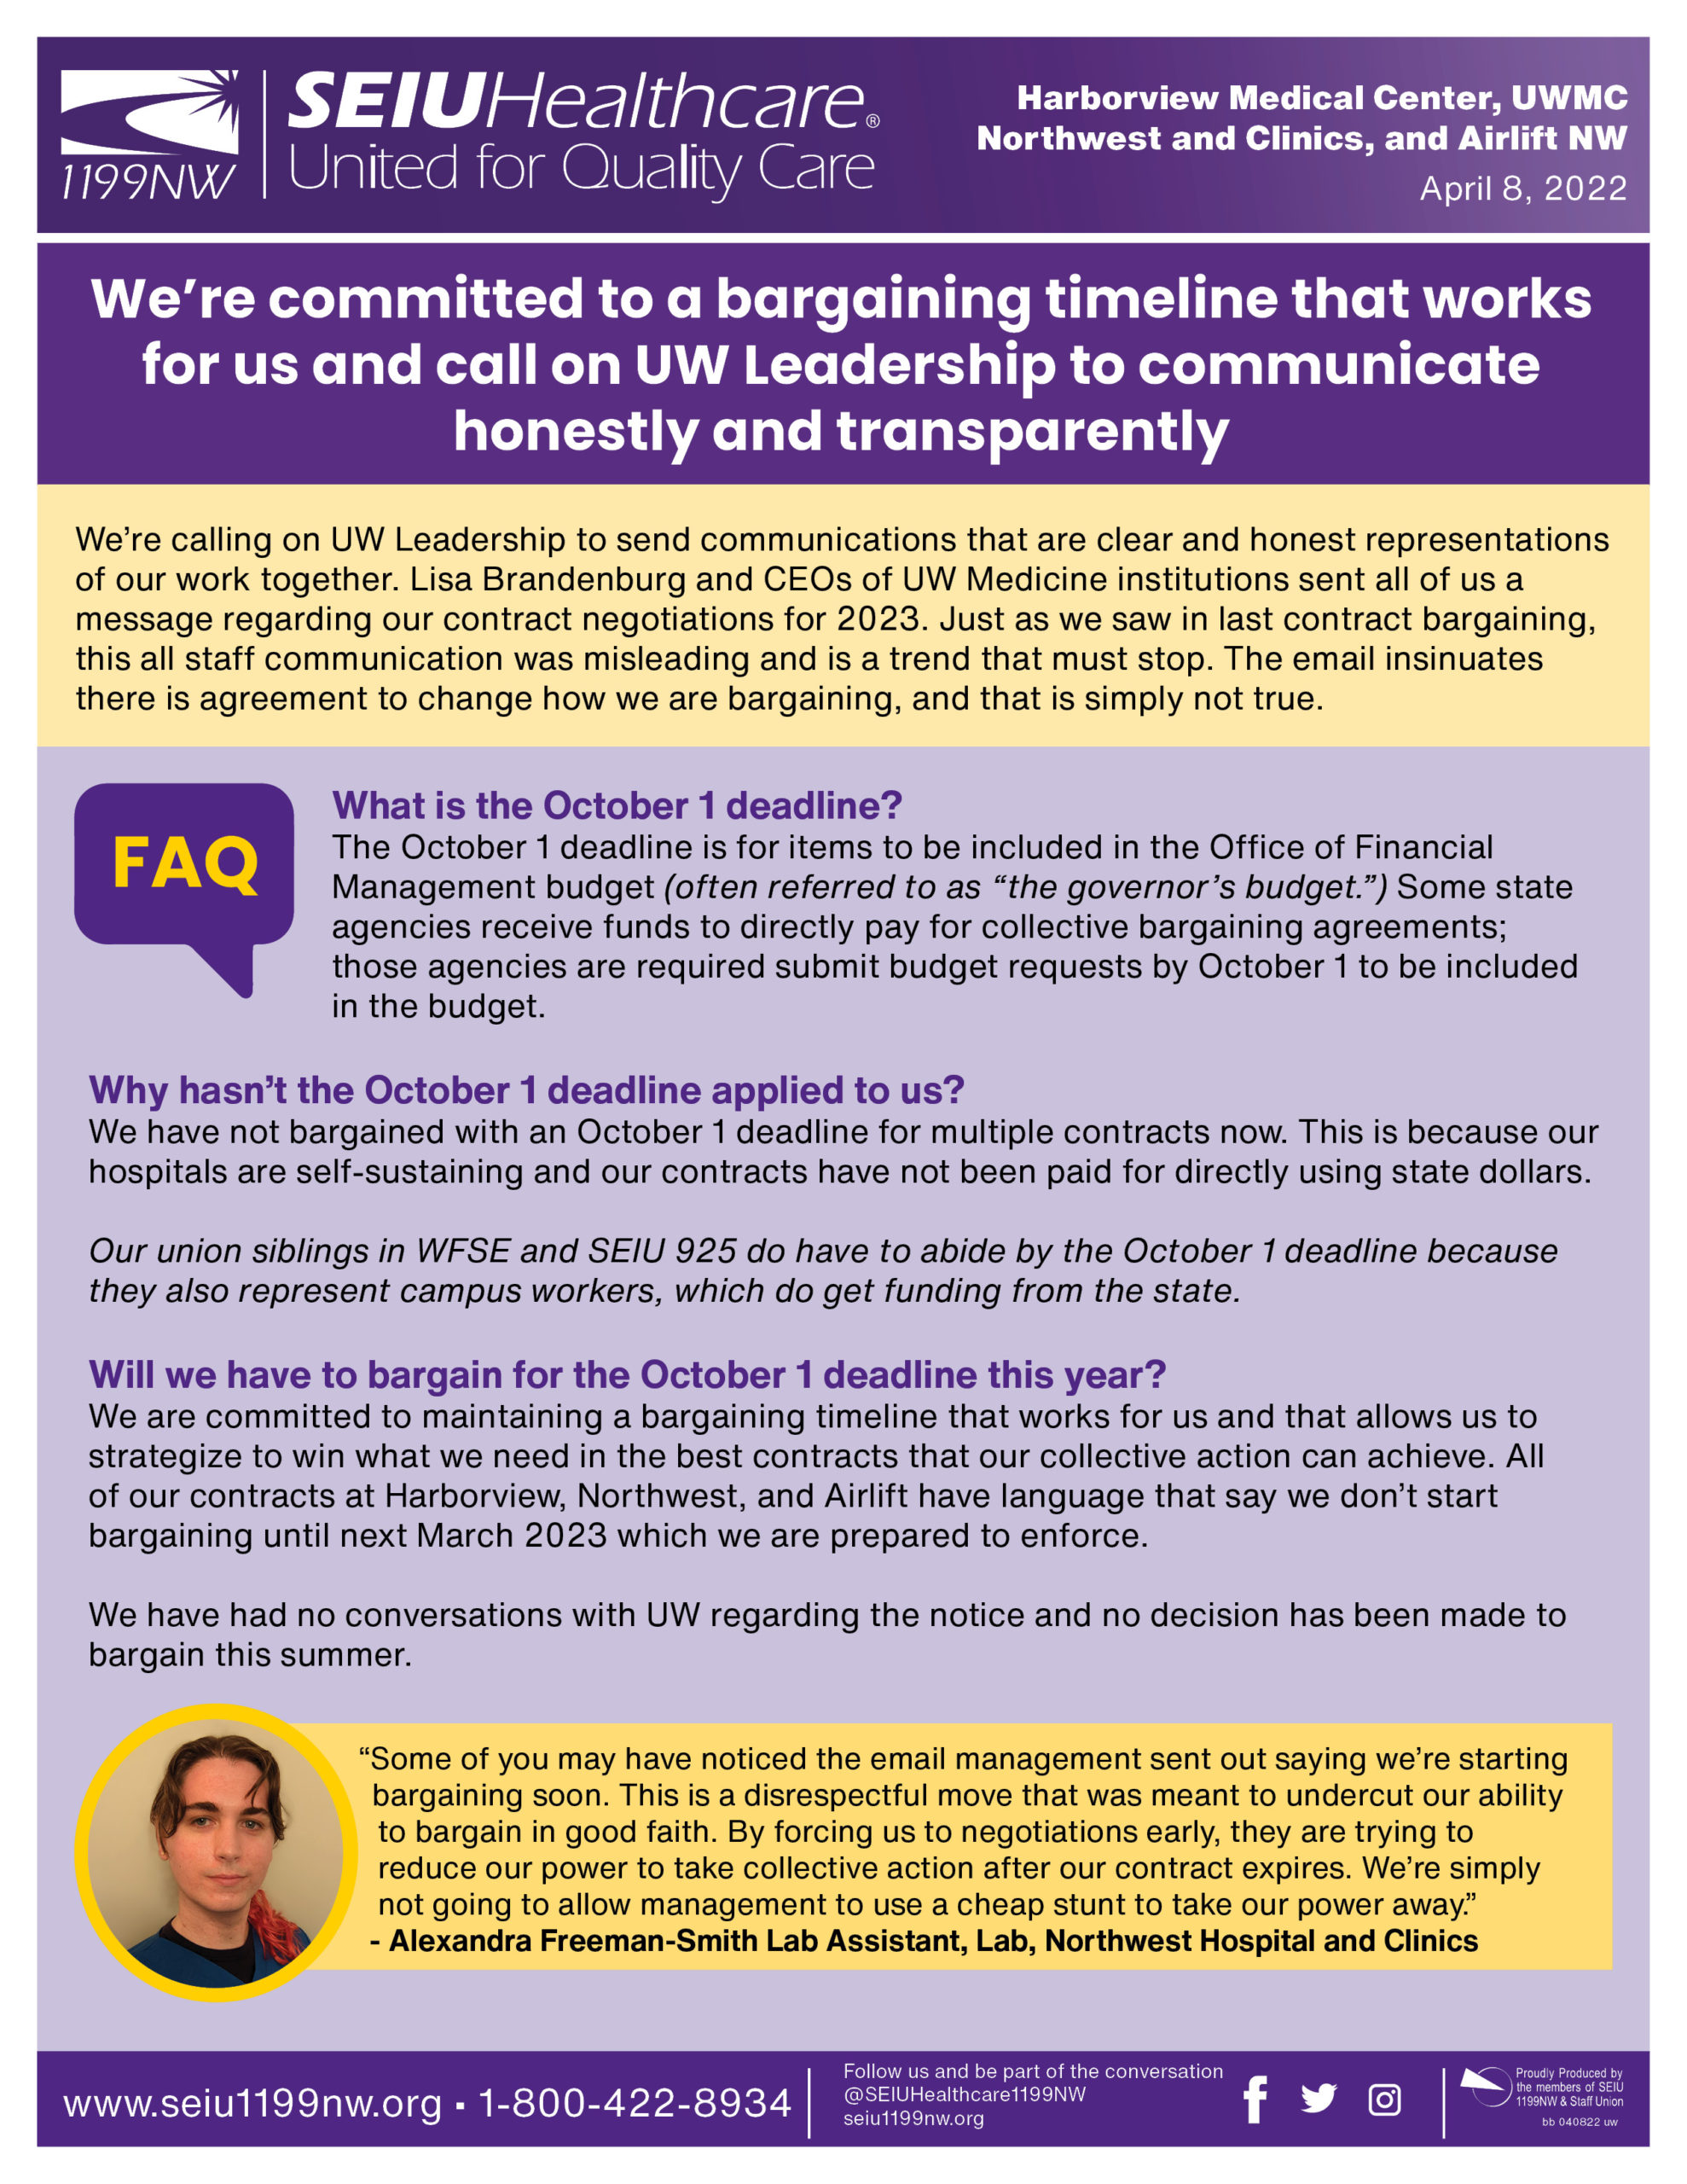 We’re committed to a bargaining timeline that works for us and call on UW Leadership to communicate honestly and transparently